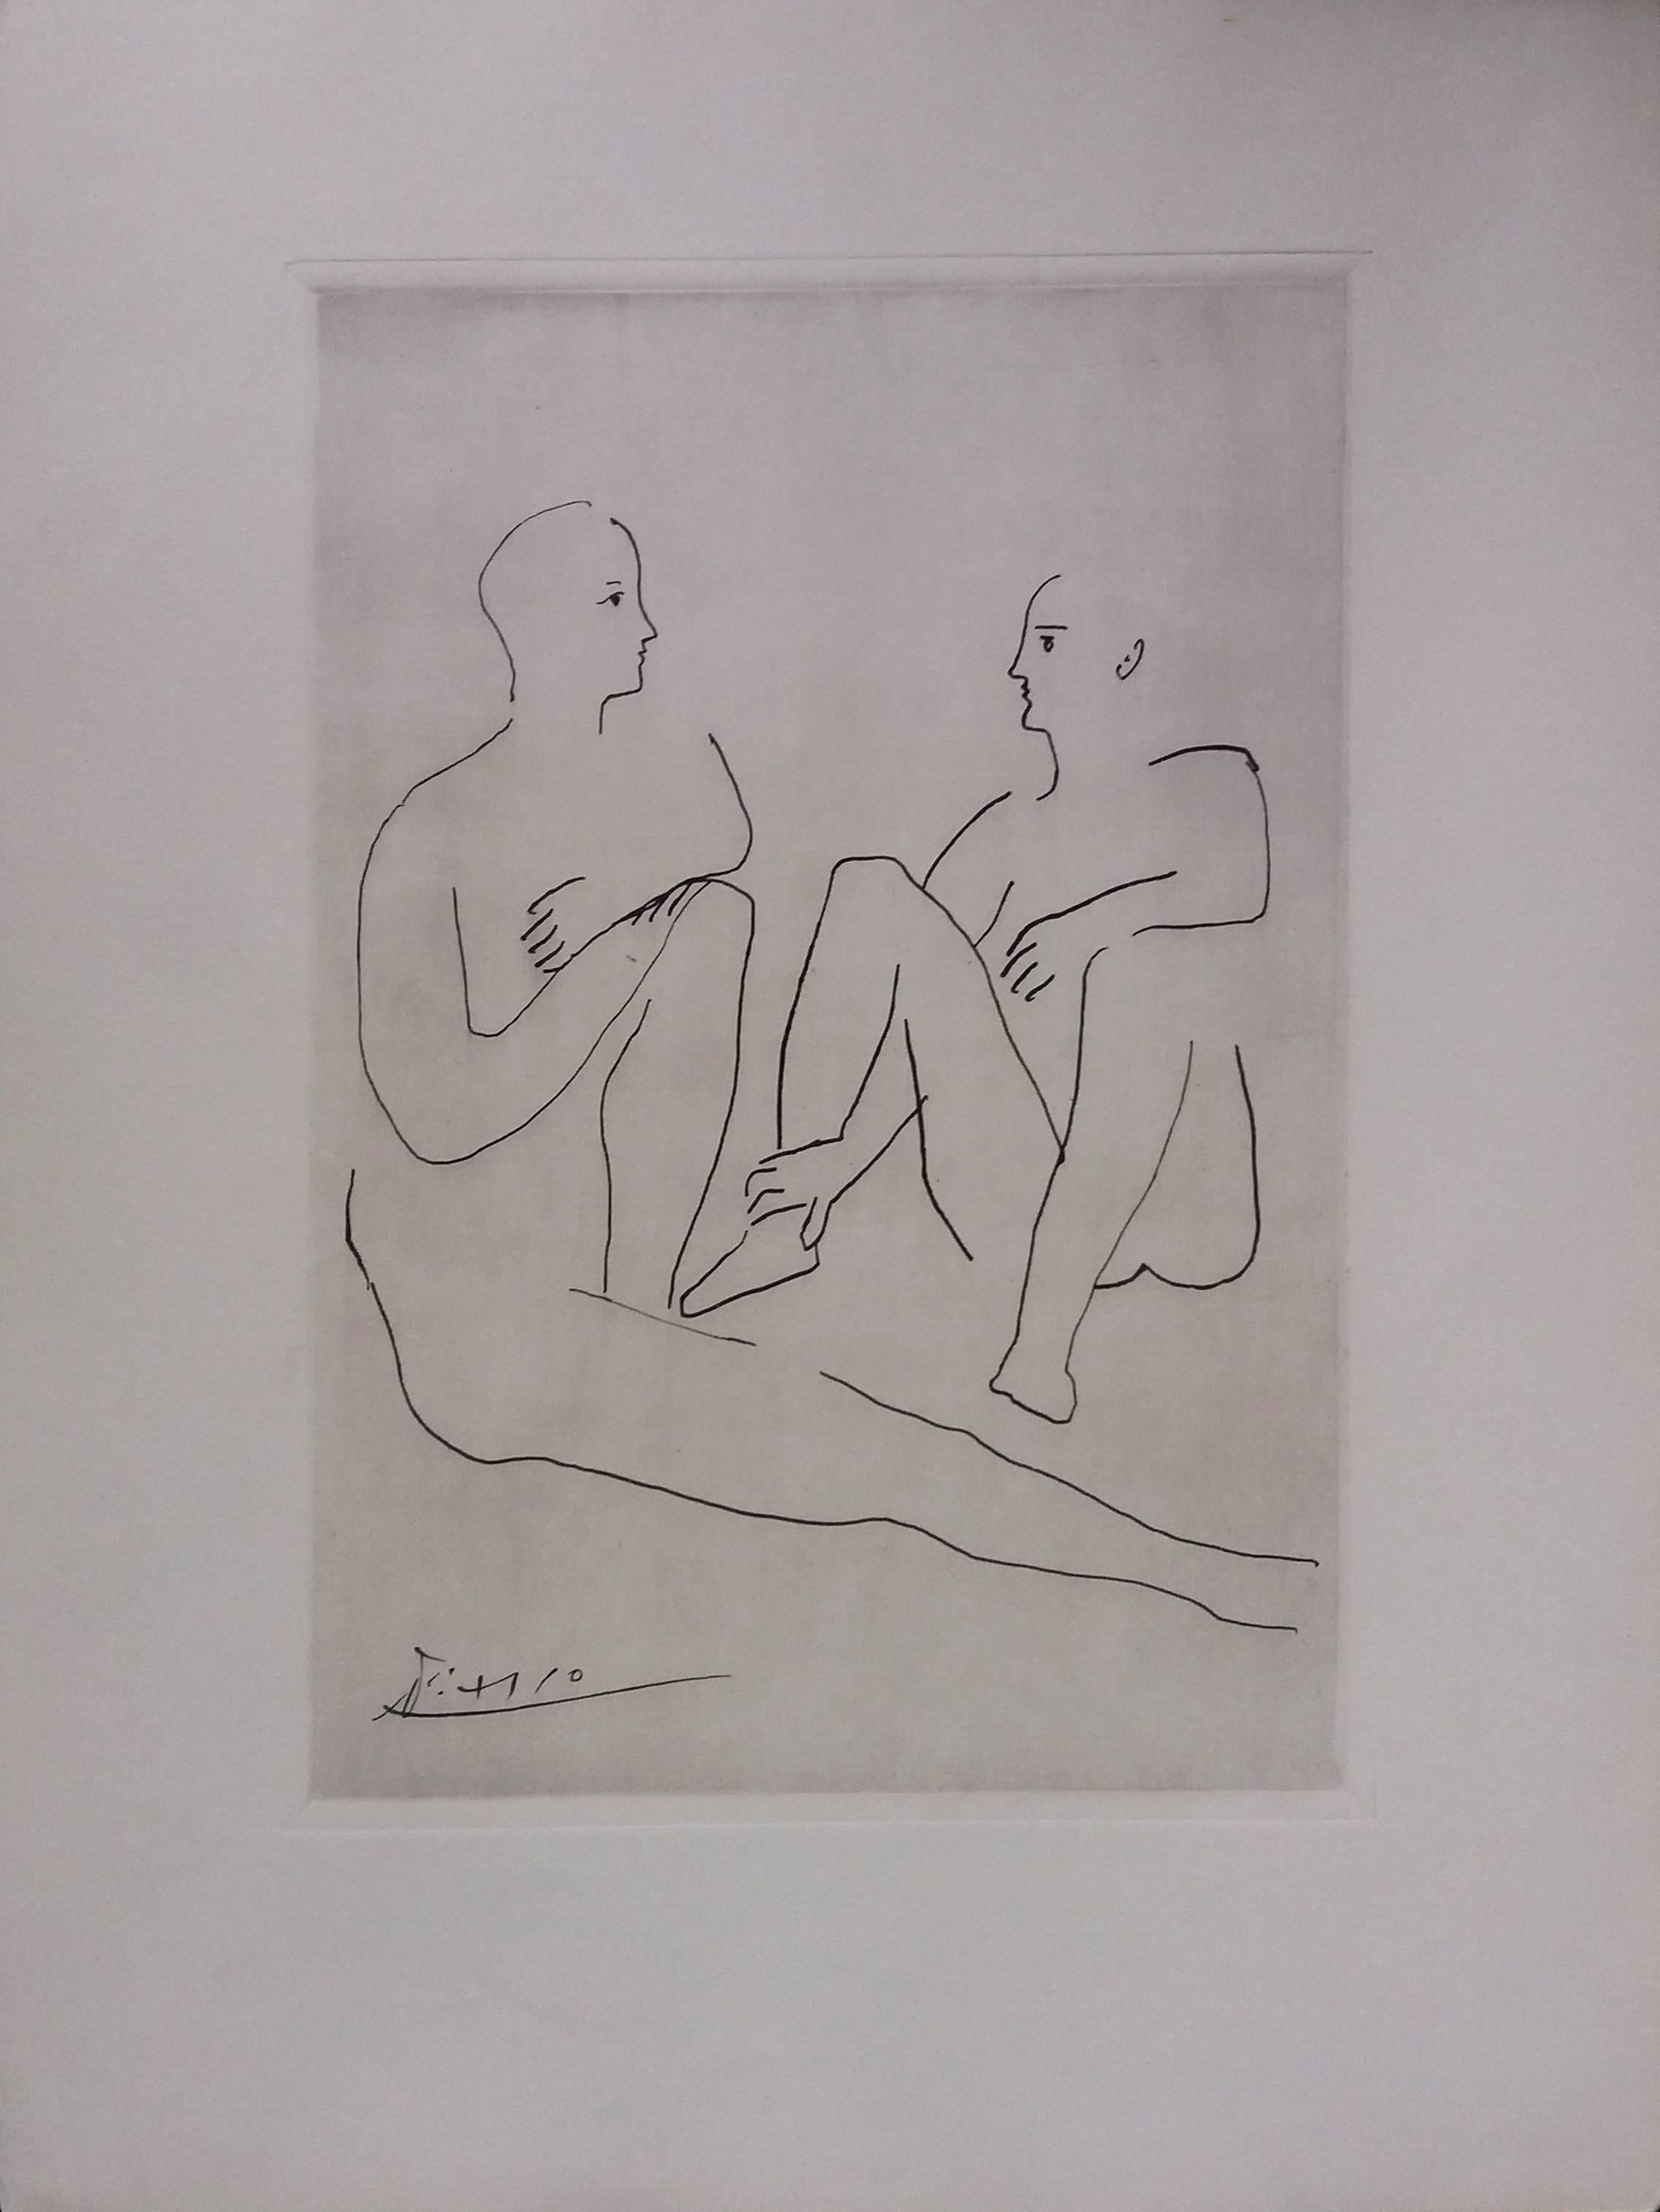 (after) Pablo Picasso Figurative Print - Pablo Picasso original drawing engraved on copper 5/8 (1943) 